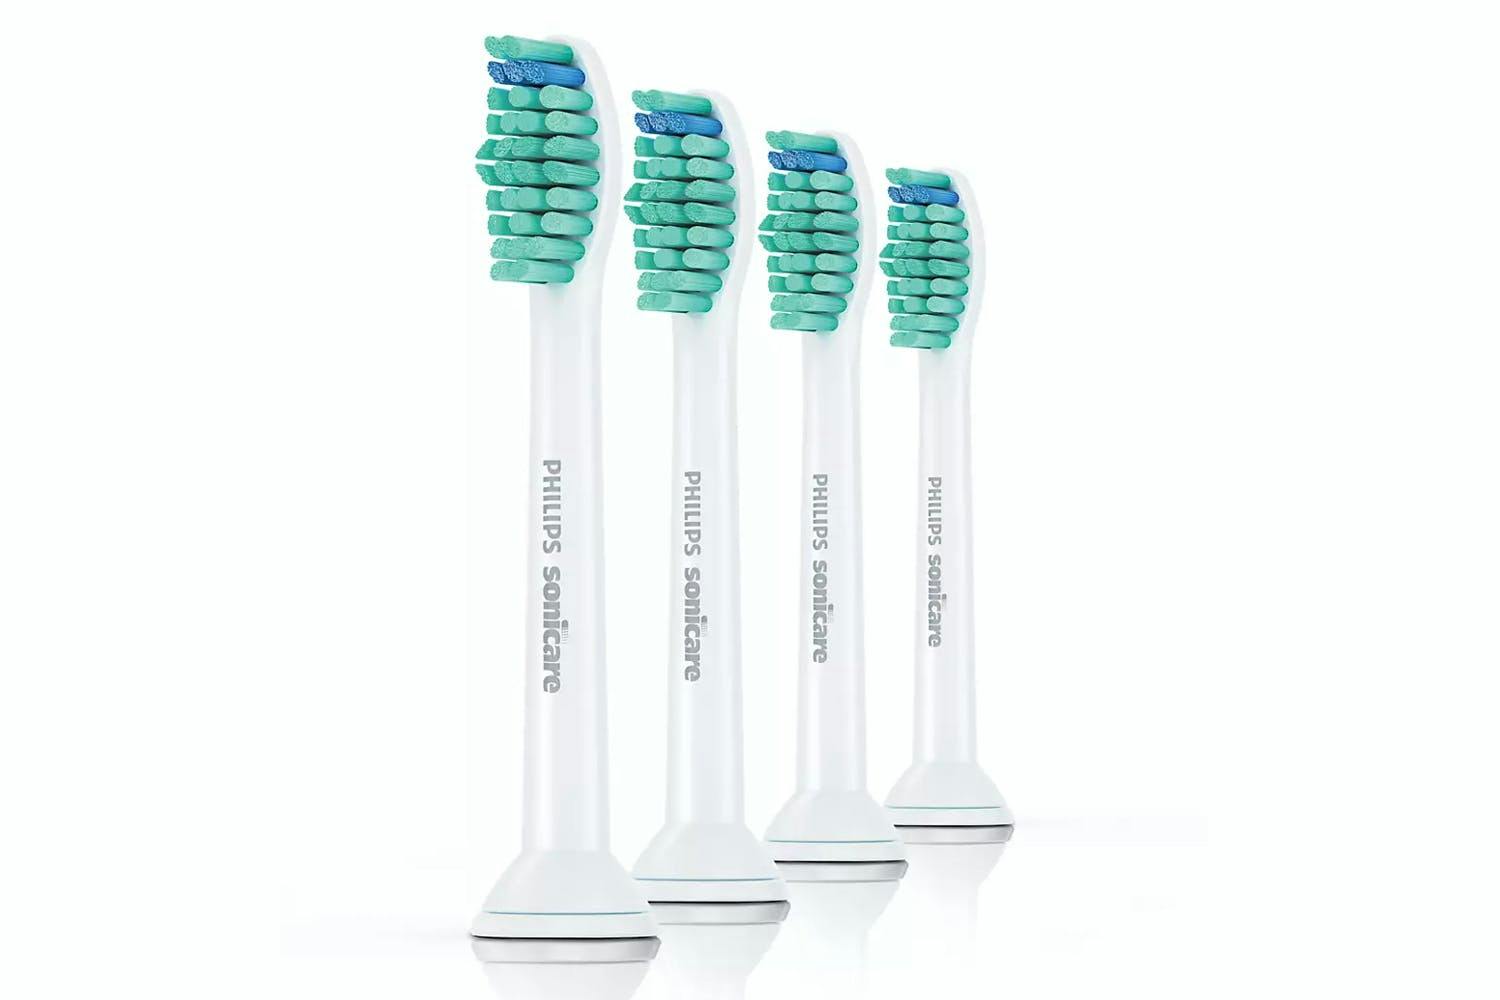 Philips Sonicare ProResults Standard Sonic Toothbrush Heads | Pack of 4 | HX6014/07